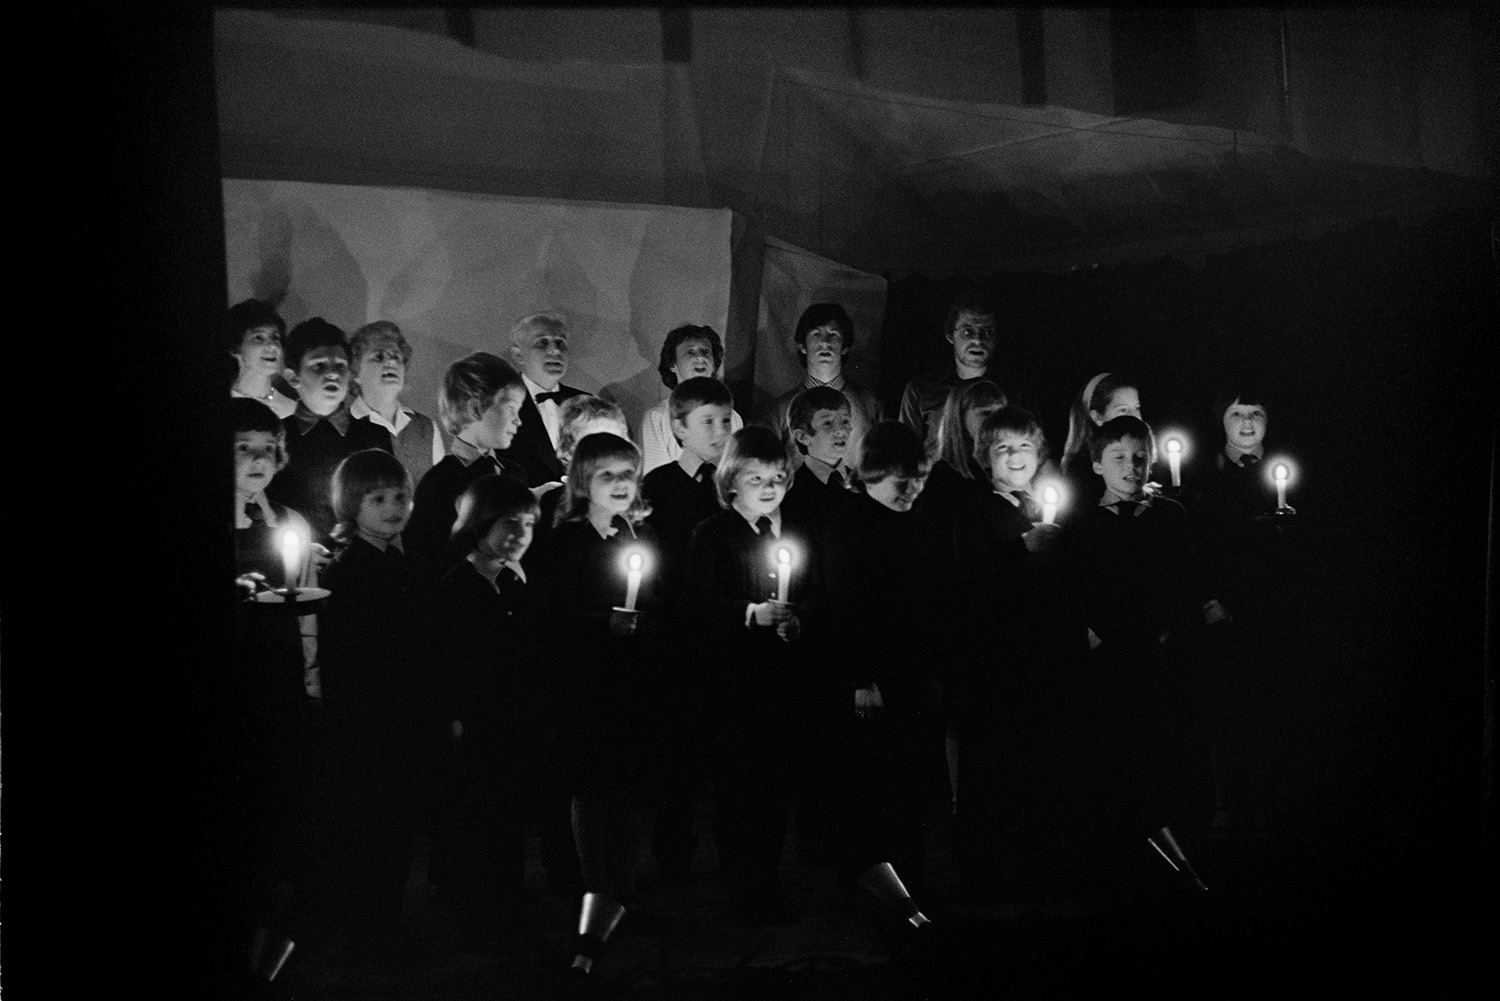 Christmas entertainment in village hall, singing and dance, short plays.
[Children and adults singing on a stage at High Bickington village hall at an evening of Christmas entertainment. Some of the children are holding lit candles.]